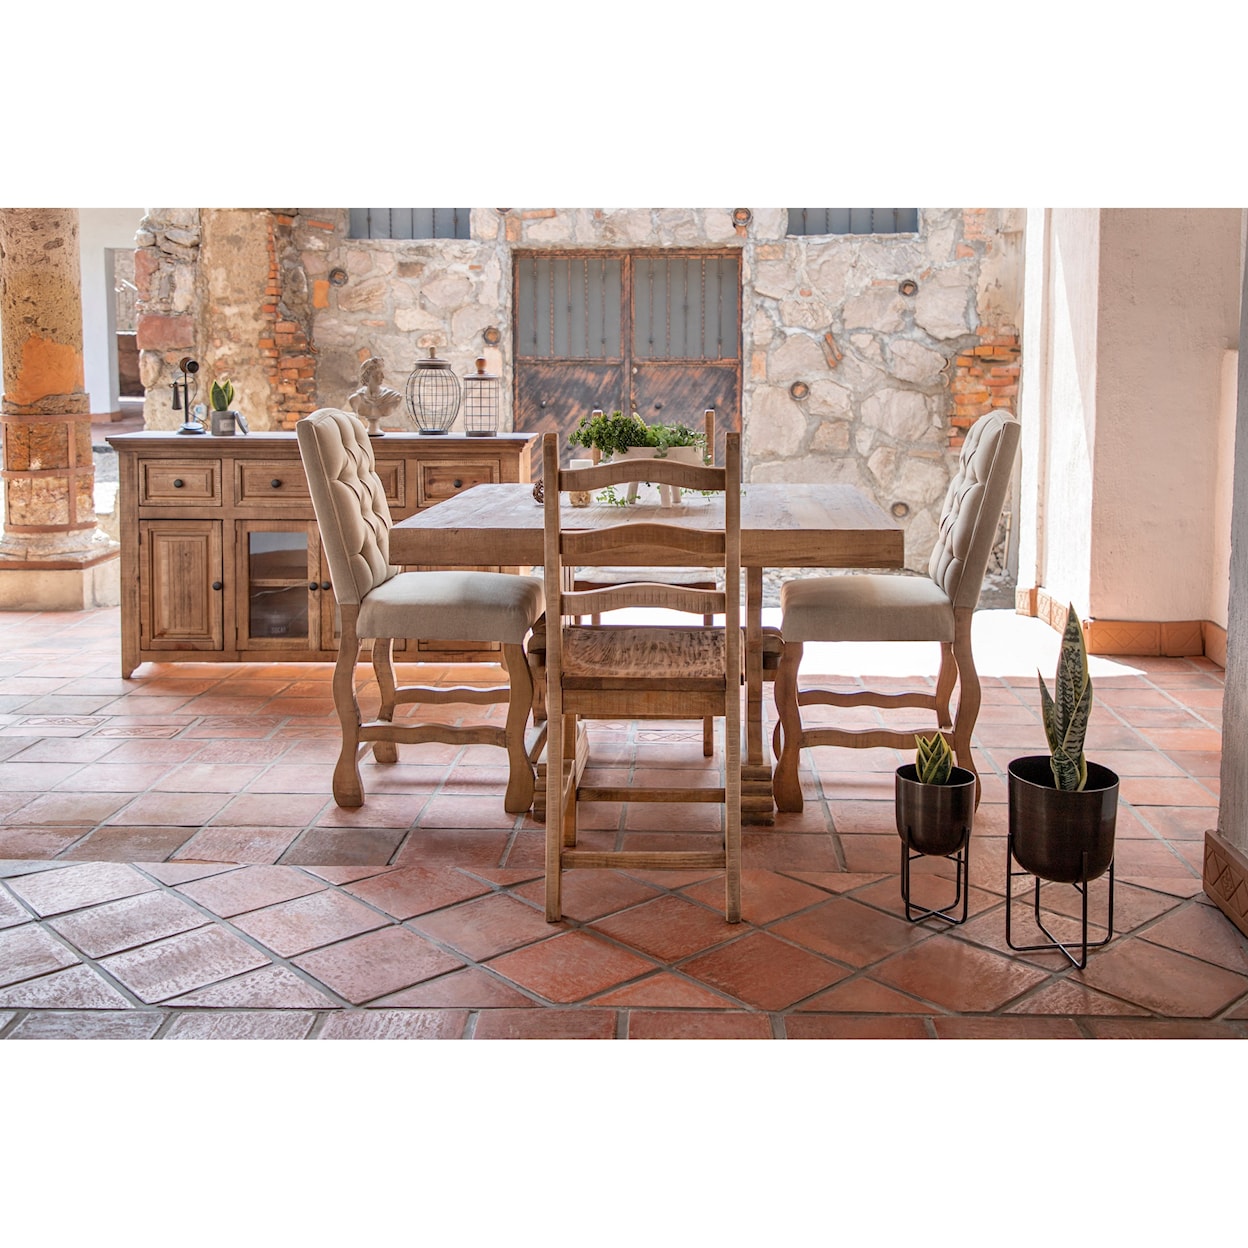 IFD International Furniture Direct Marquez Table and Chair Set